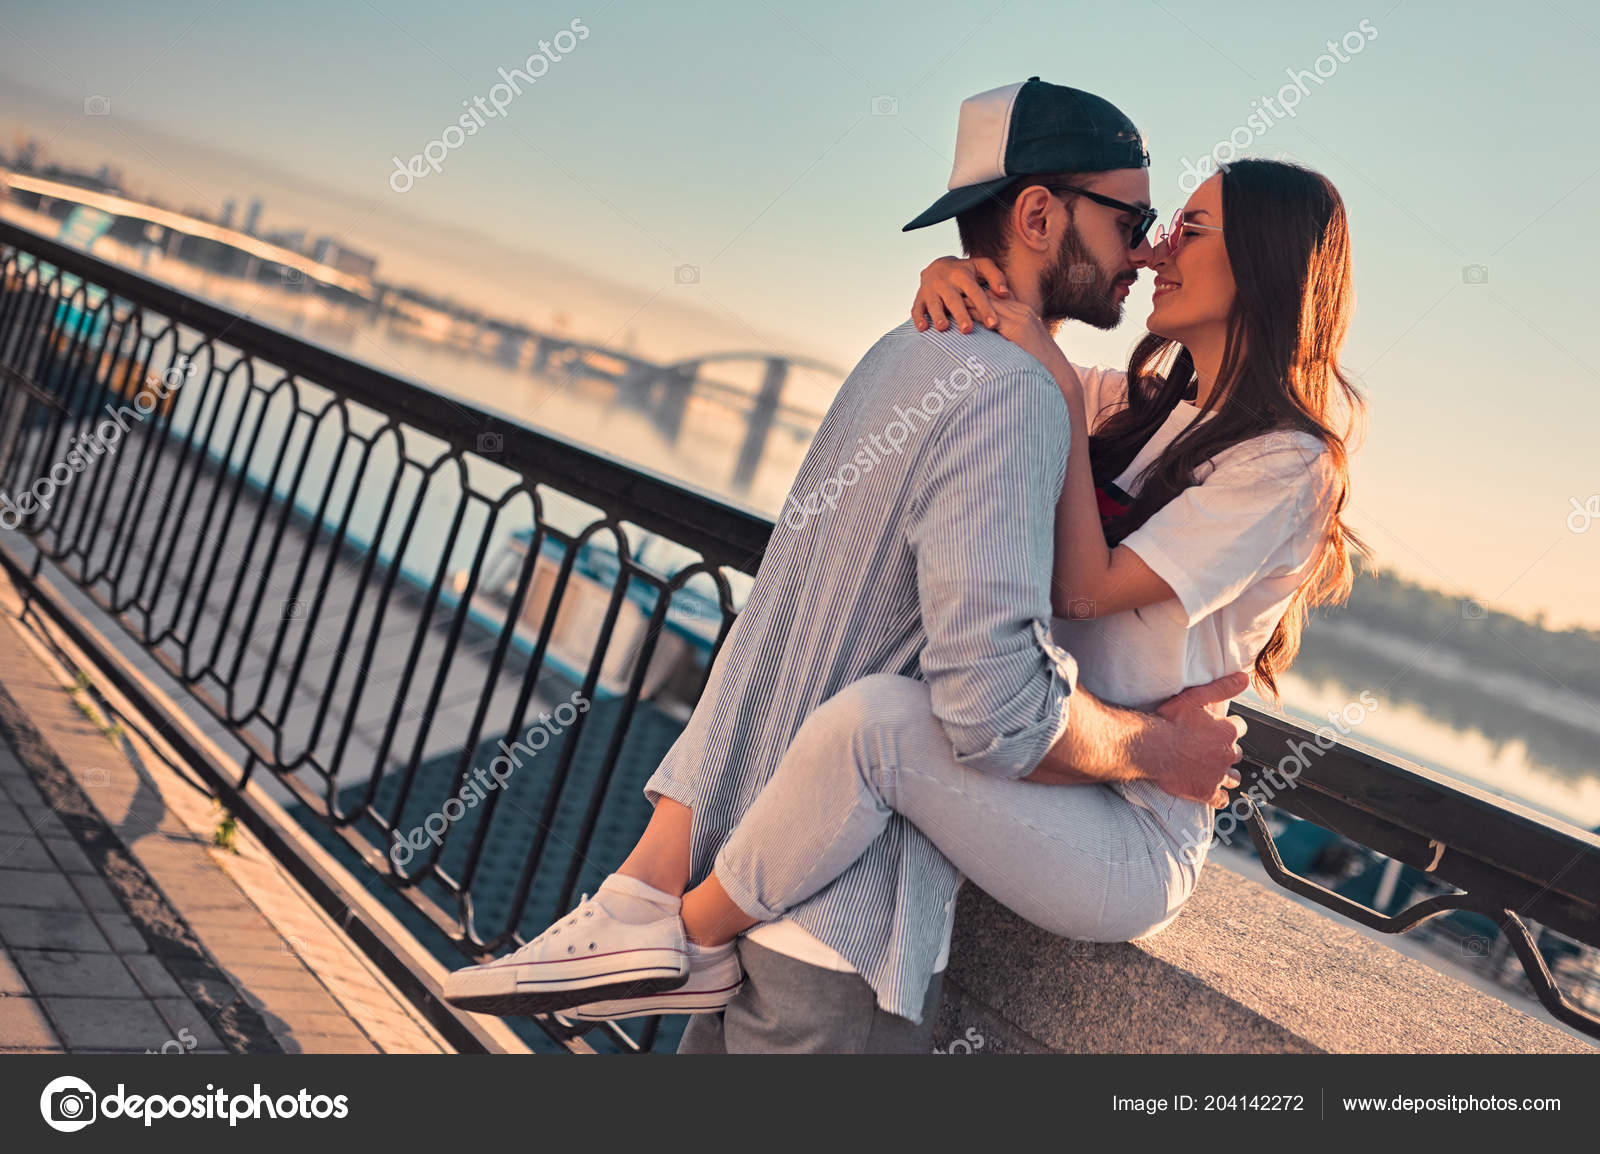 Love Air Cute Romantic Couple Spending Time Together City Handsome ...